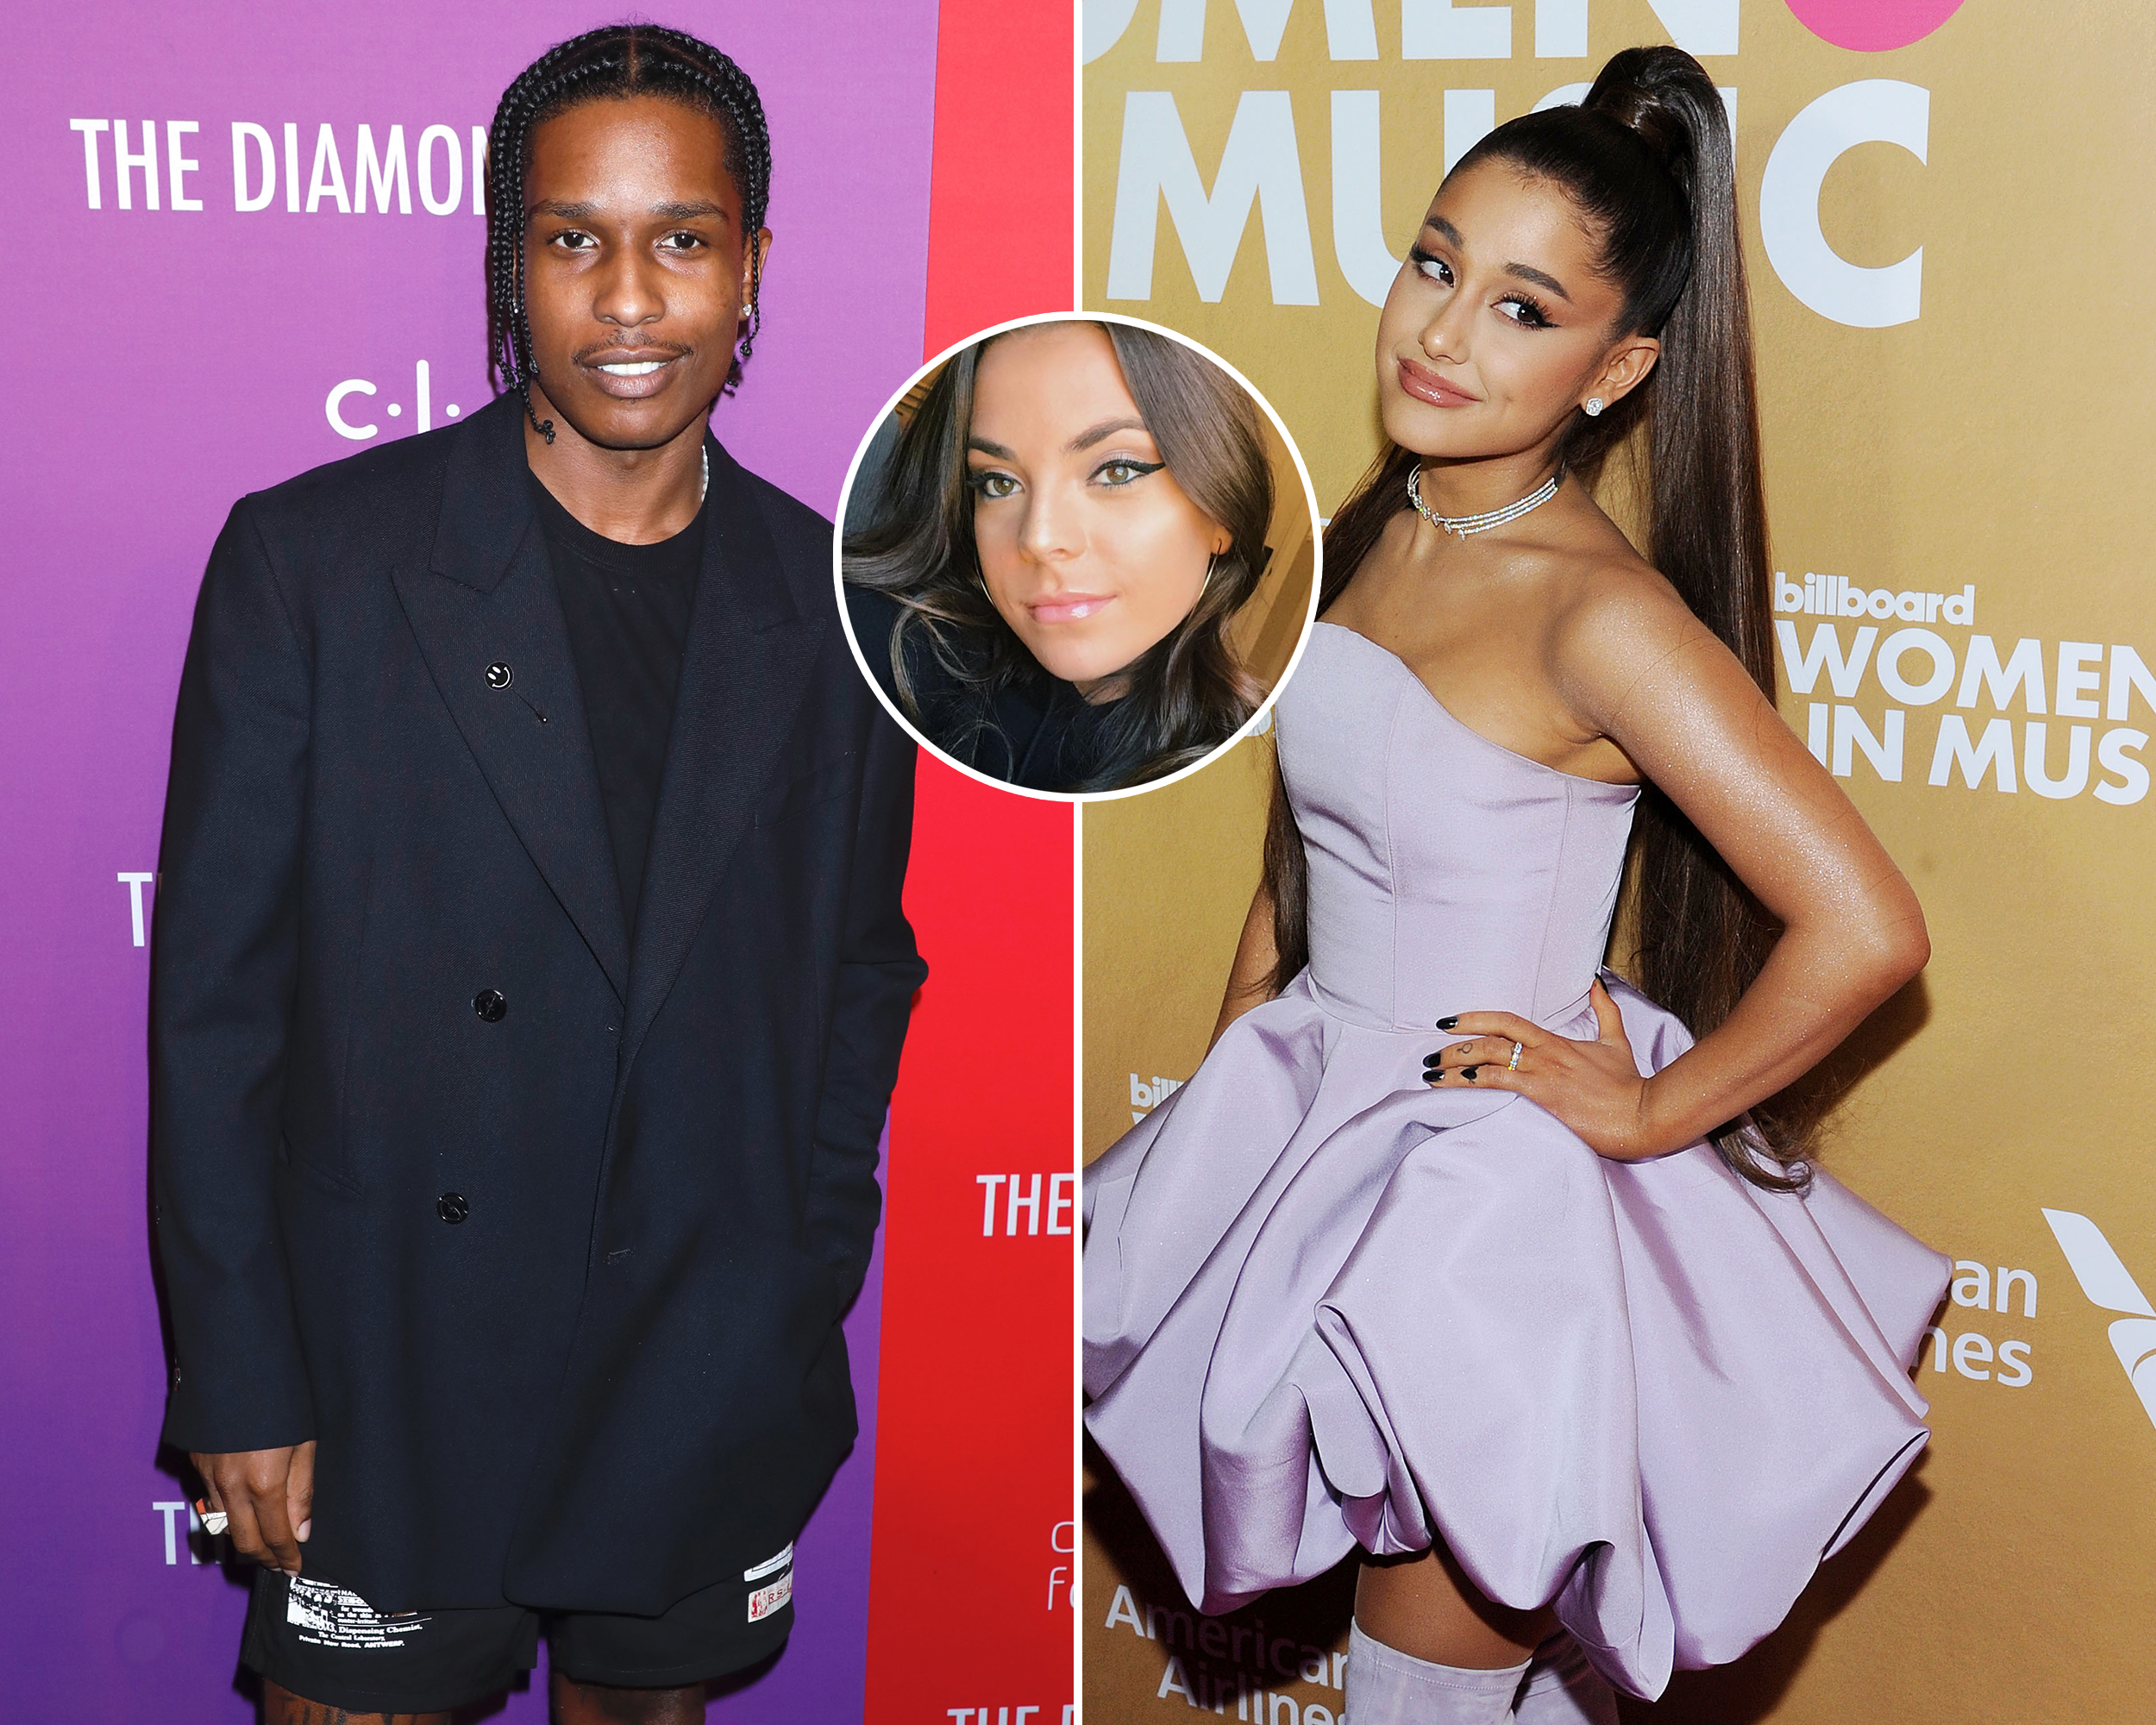 Arreana Celebrity Porn Tapes - Ariana Grande Tries to Hook Pal Up Amid ASAP Rocky Sex Tape Drama